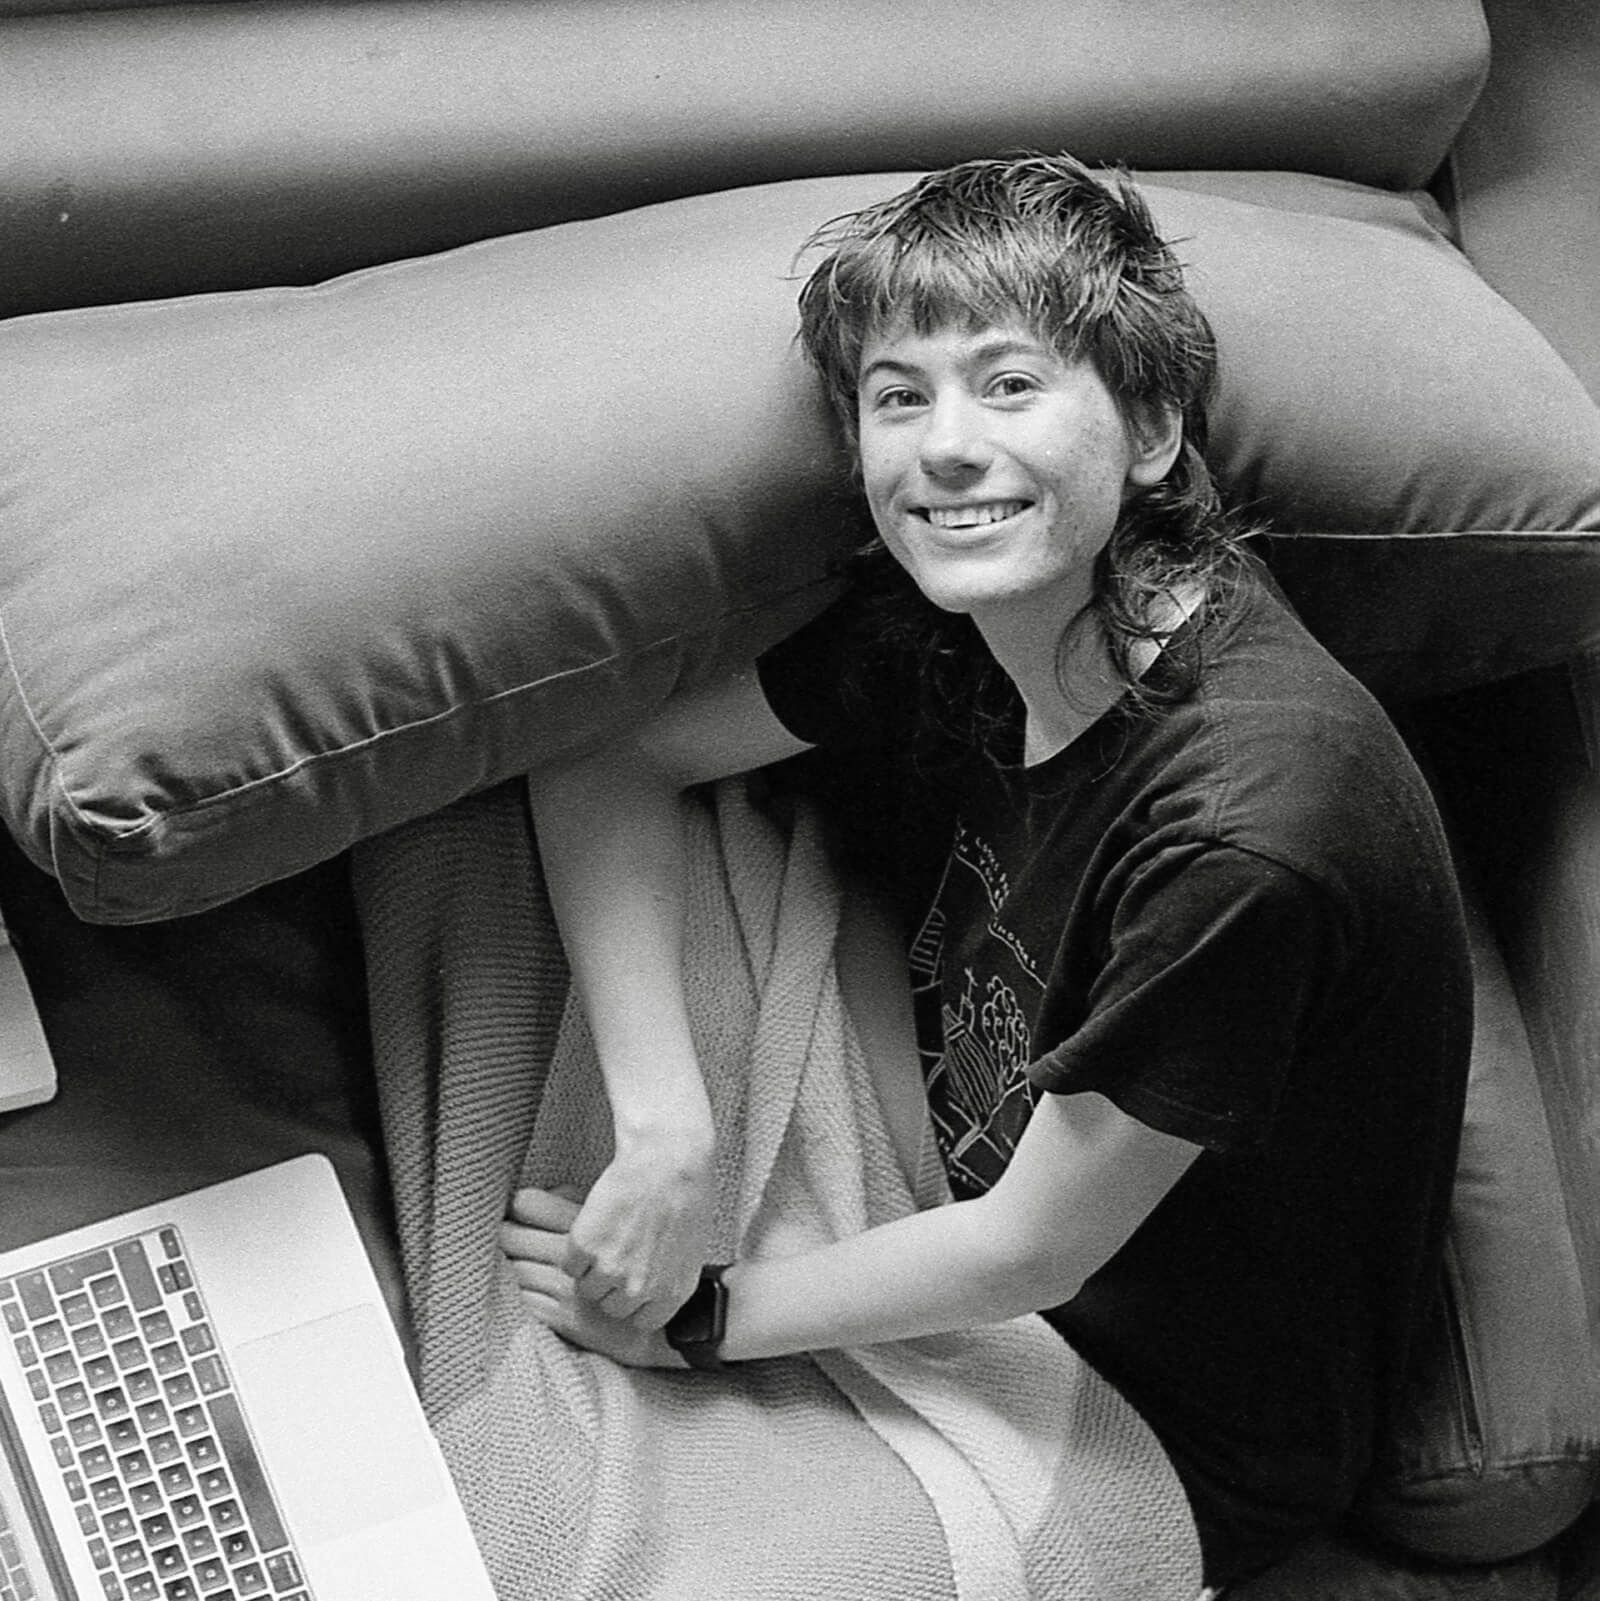 Em Constance, a designer, sits on a couch with their laptop open in front of them